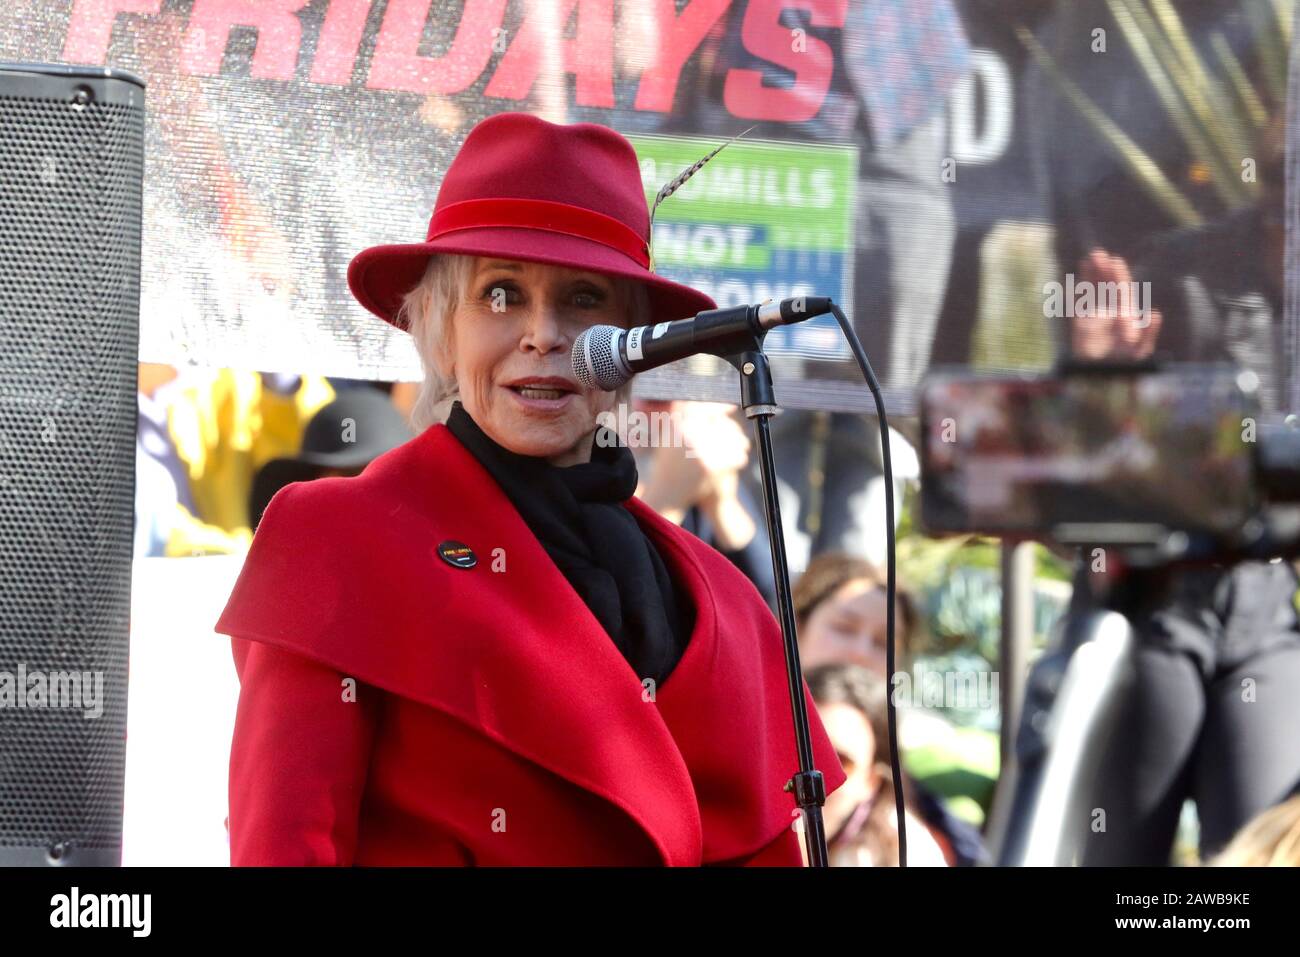 Los Angeles, USA. 8th Feb, 2020. Actress Jane Fonda speaks during the Fire Drill Fridays rally in Los Angeles, the United States, Feb. 7, 2020. Jane Fonda led the Fire Drill Fridays rally, calling for action to address climate change. Credit: Xinhua/Alamy Live News Stock Photo